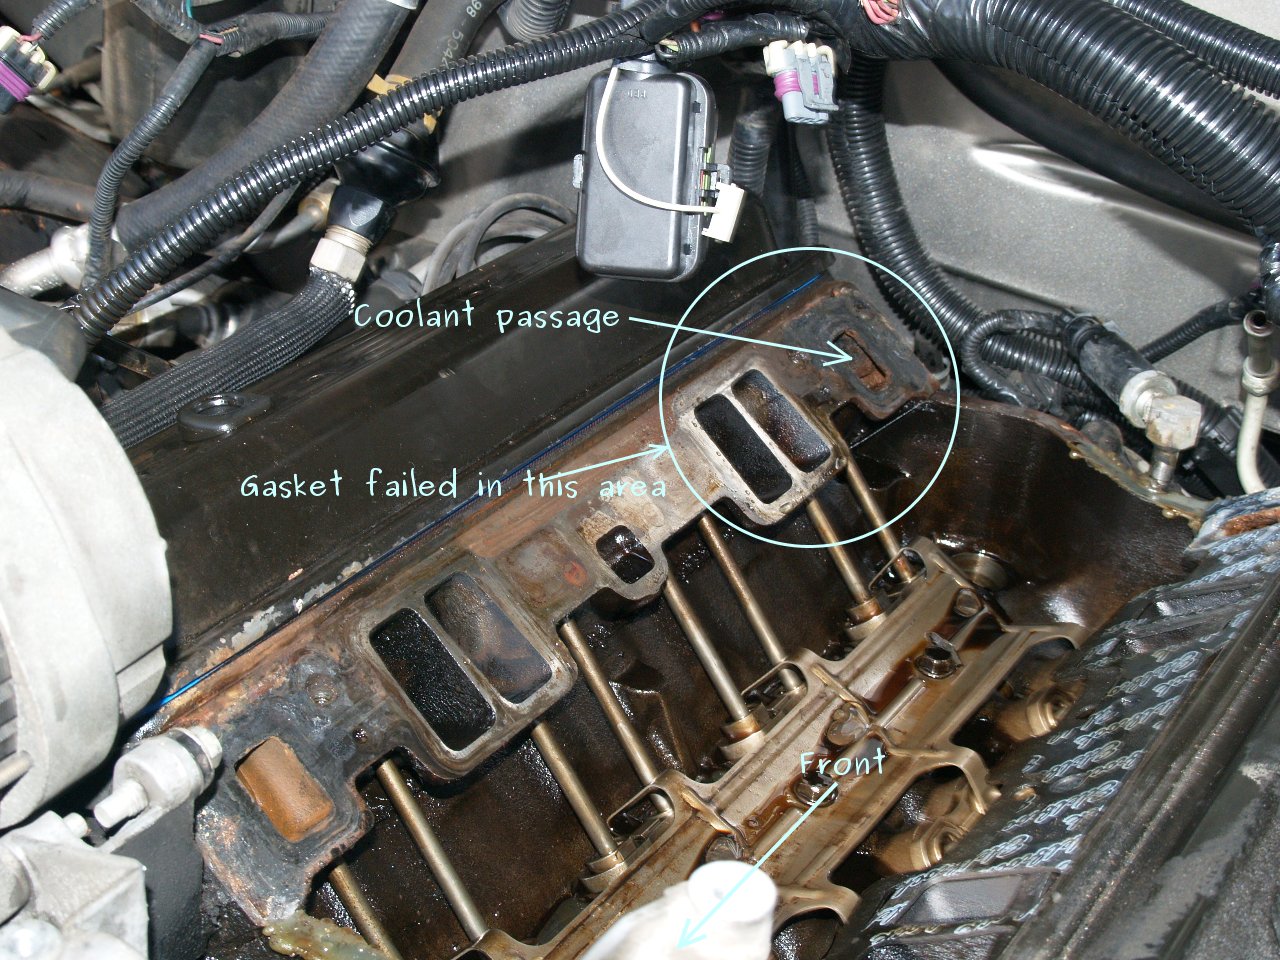 See P3394 in engine